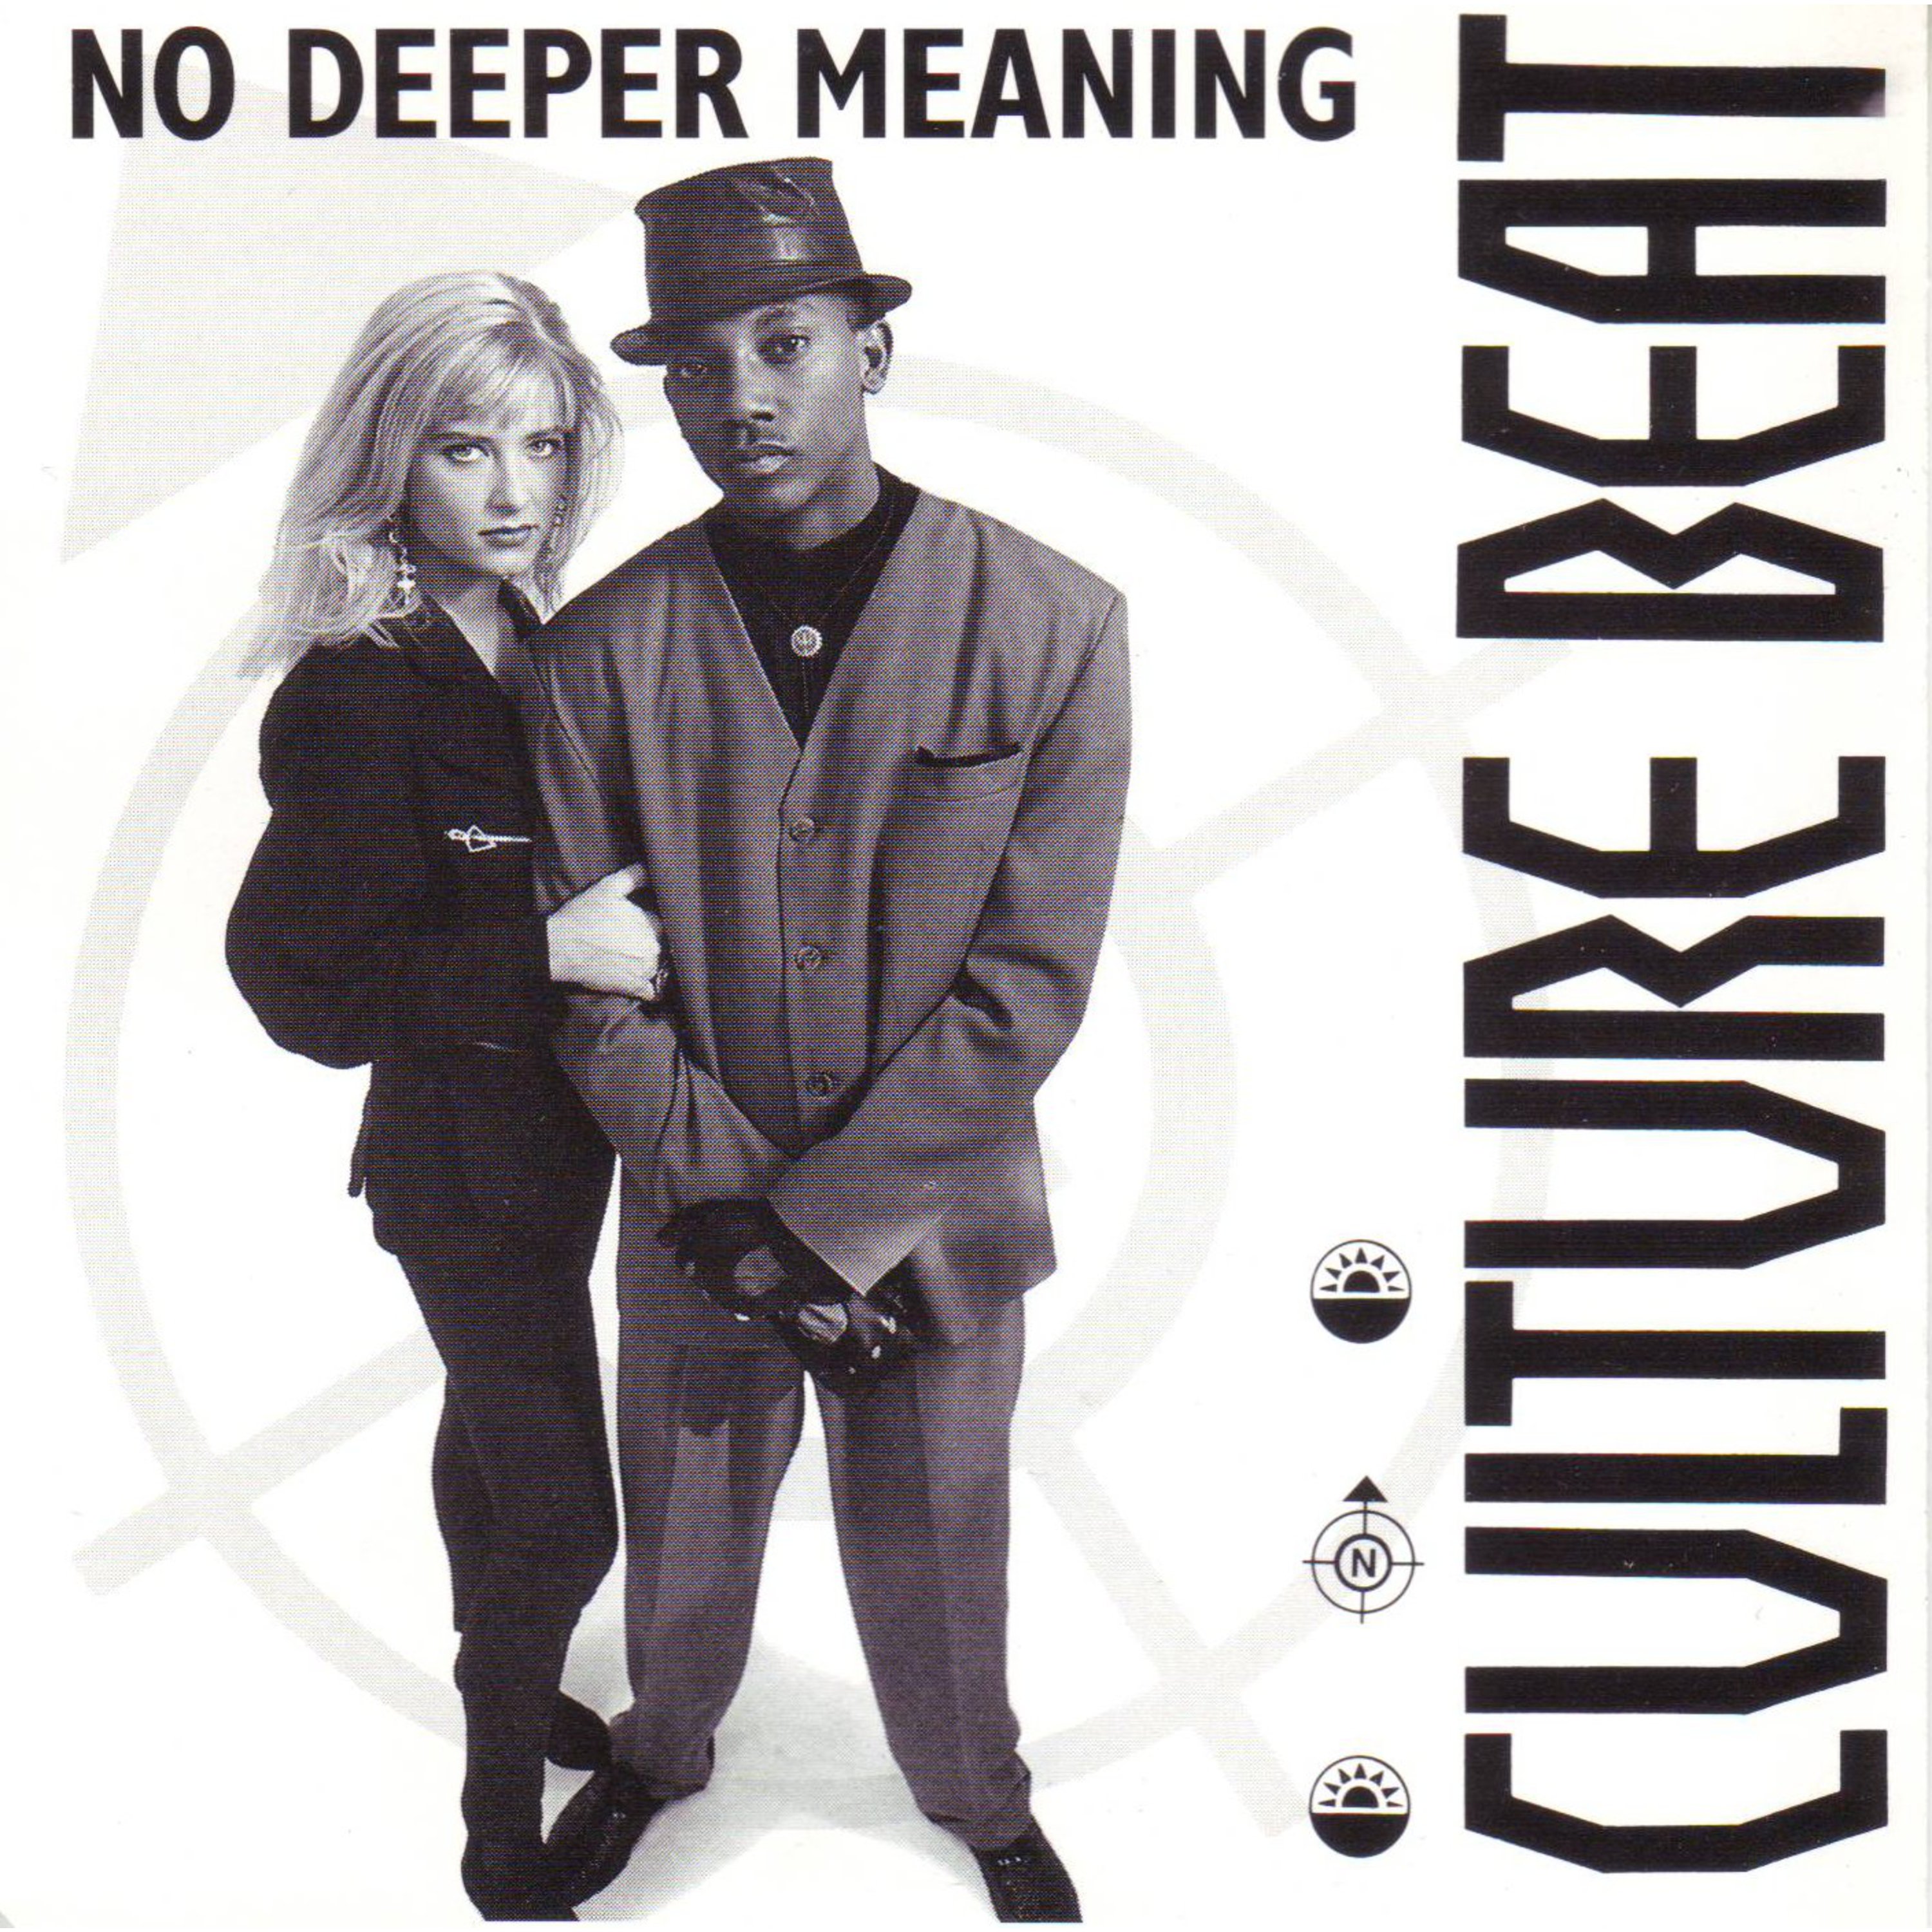 No Deeper Meaning (51 West 52 Street Mix)